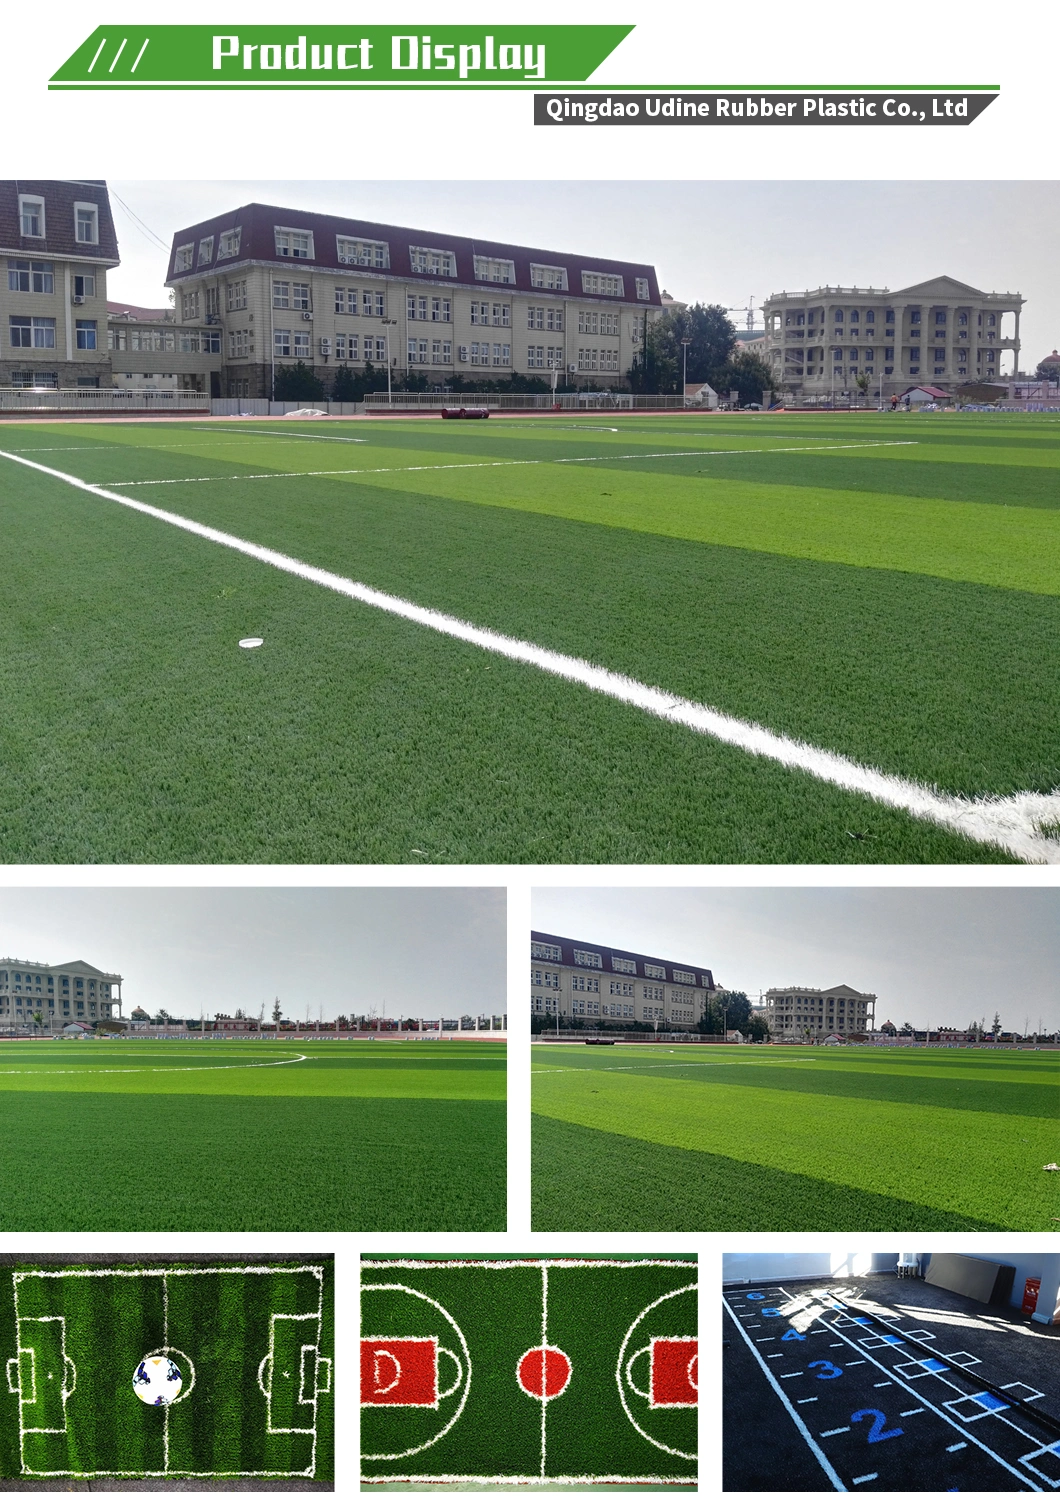 China Wholesale Plastic High Density Sport Artificial Turf Lawn Rugby Fake Synthetic Turf Pet Landscape Grass Football Artificial Turf Manufacturer for Football